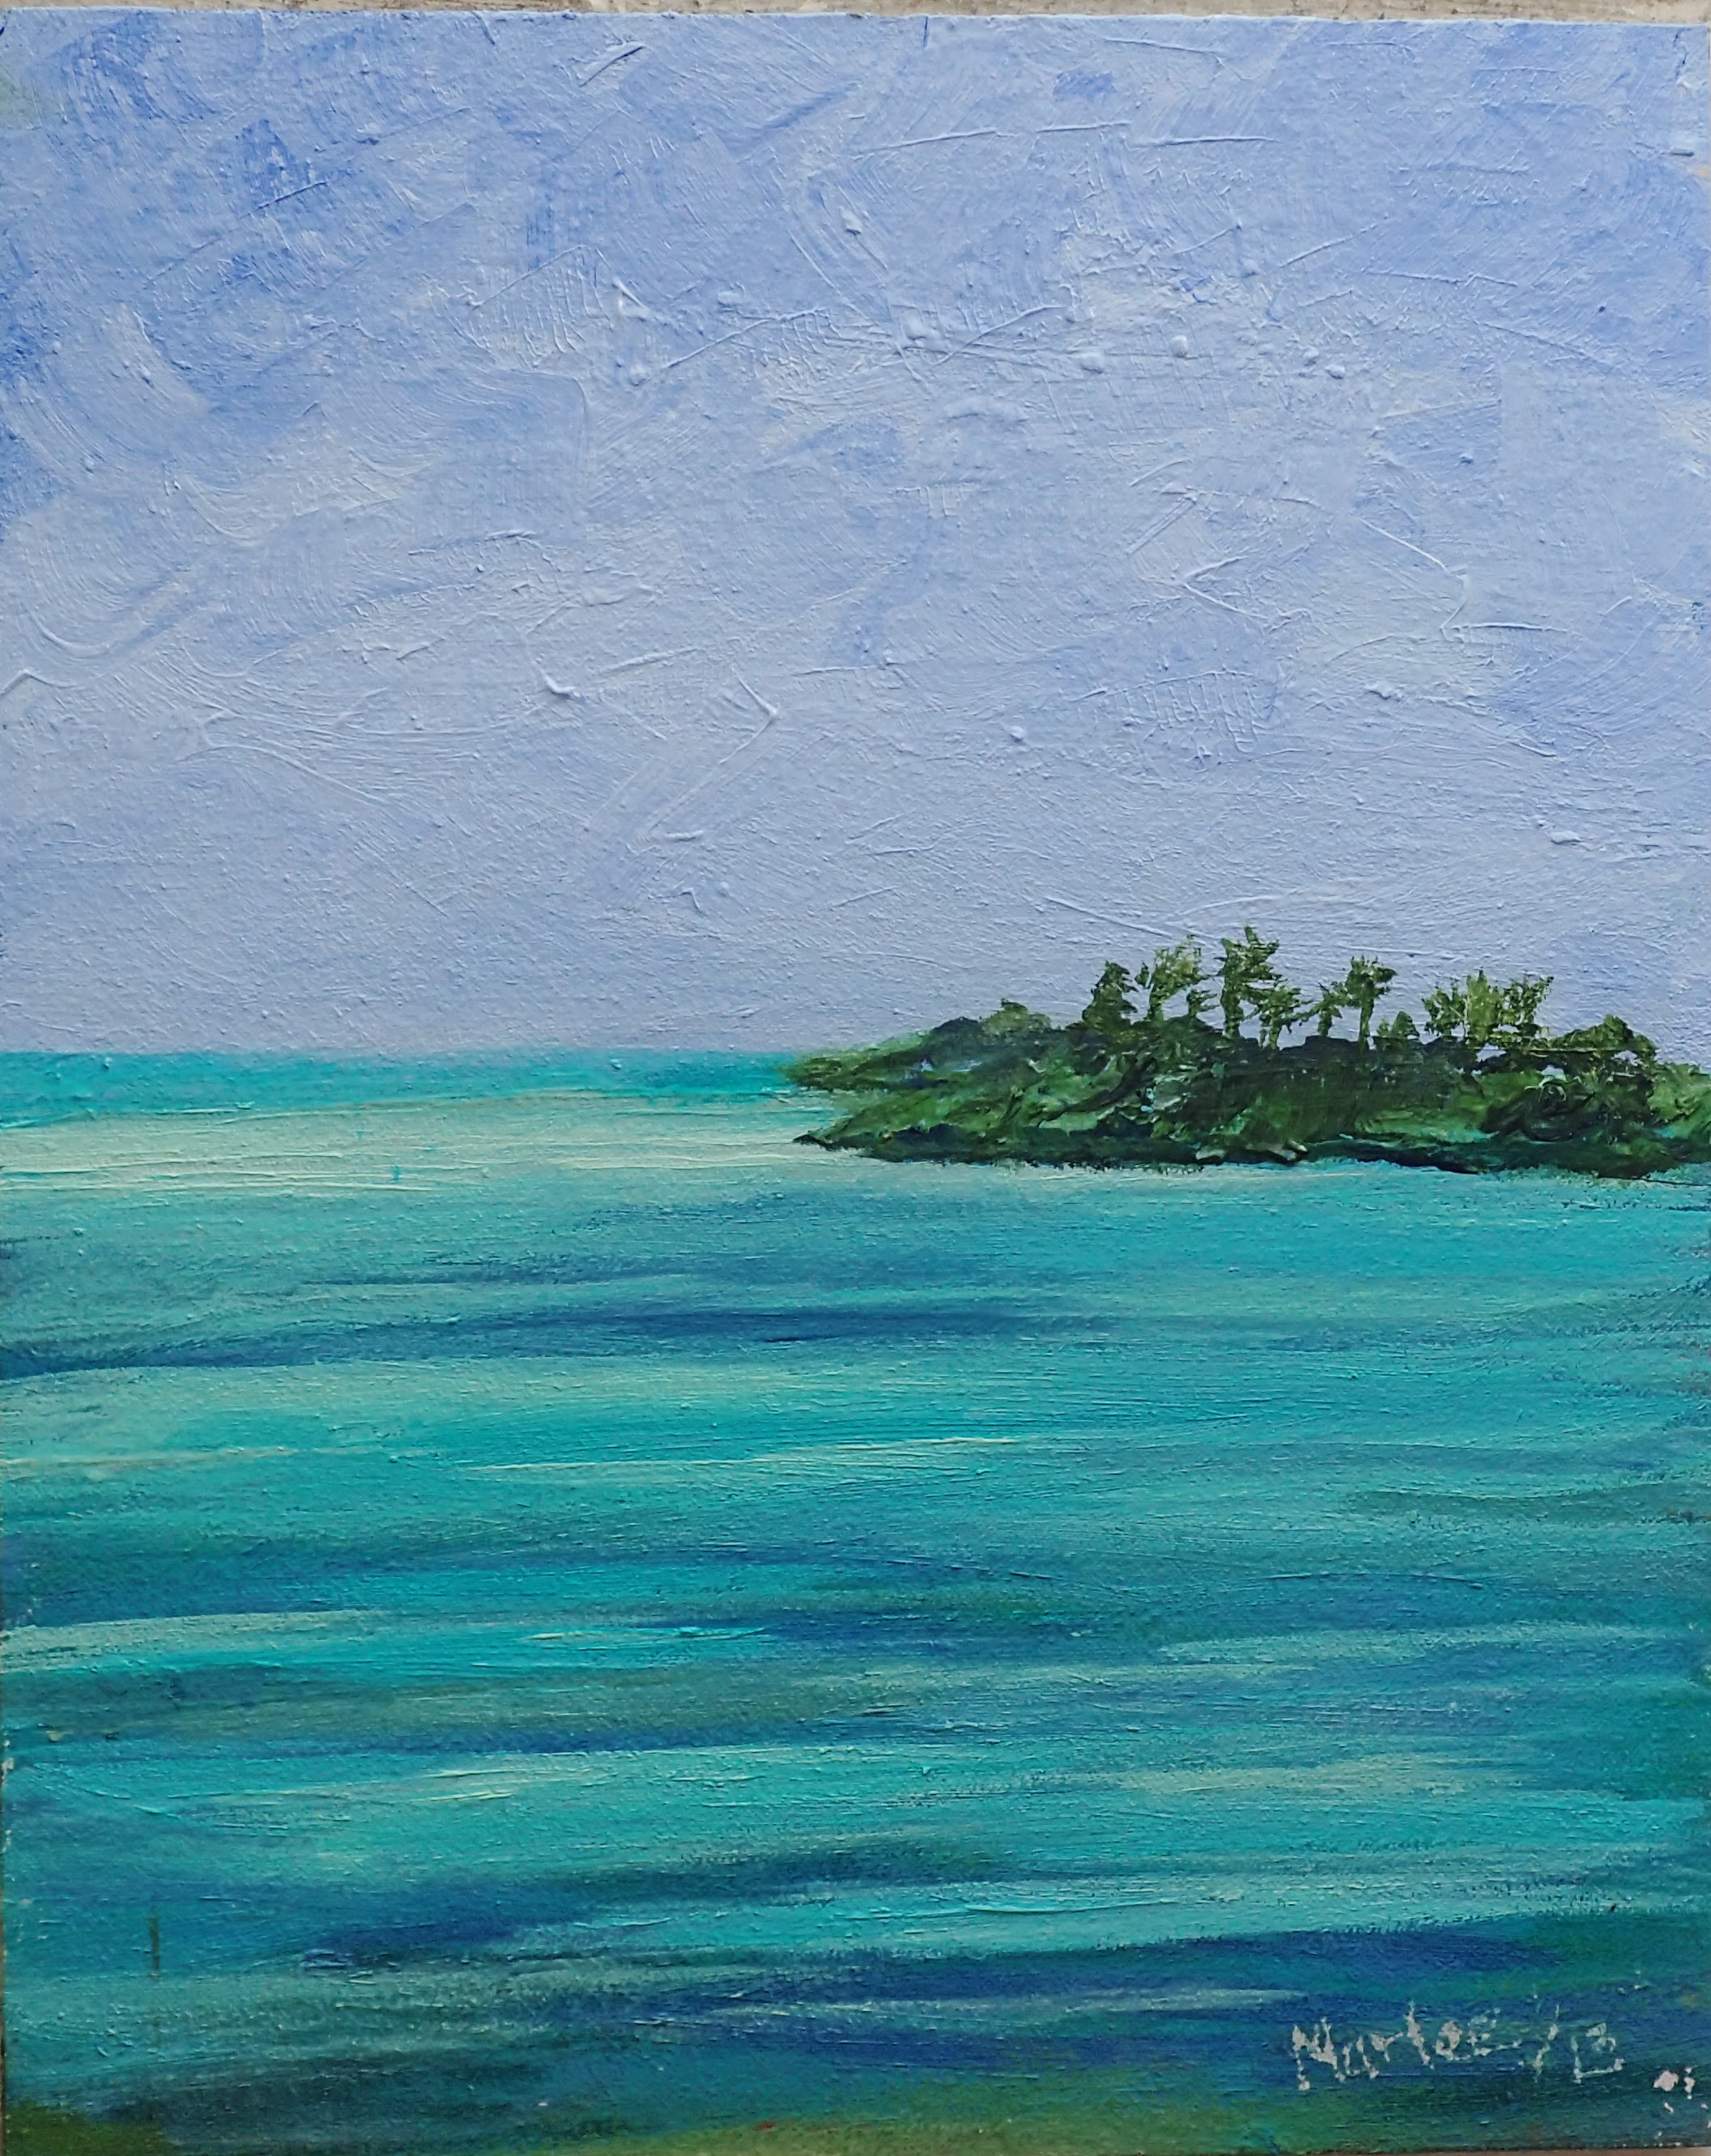 Original Oil Painting on canvas 8"x10" is a meditative experience as your eyes are soothed with the still tropical turquoise water of Exuma in The Bahamas